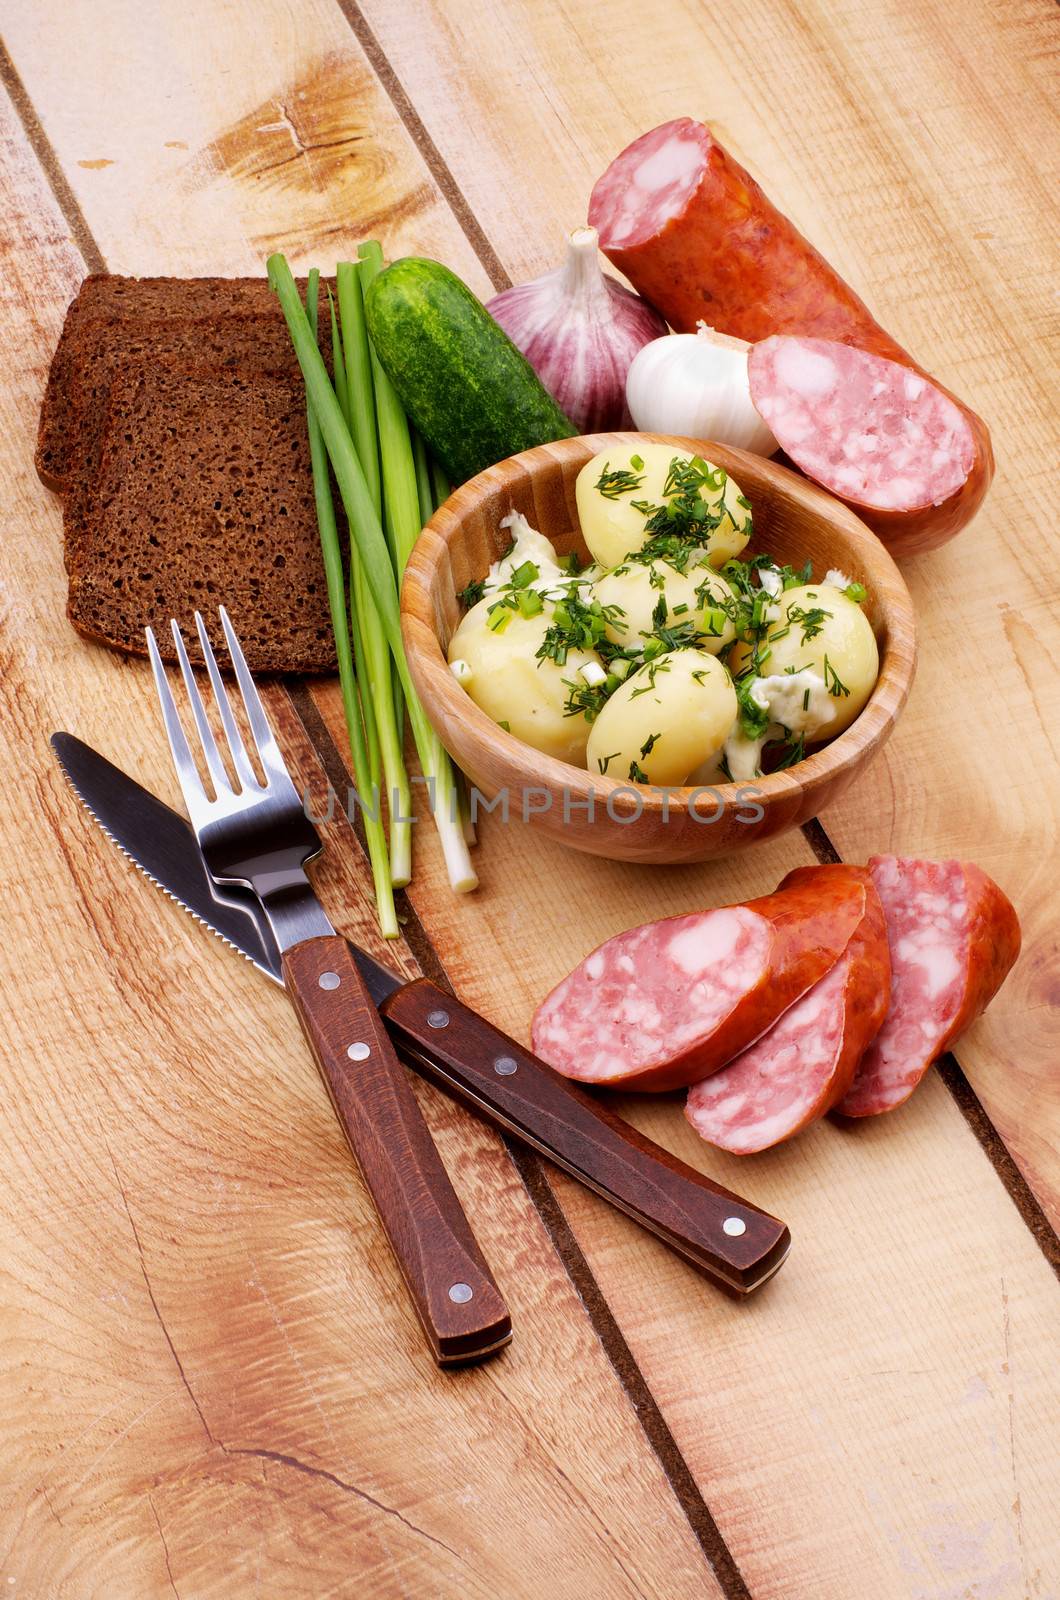 Arrangement of Boiled Potato, Greens, Homemade Smoked Sausage and Whole Grain Bread with Fork and Knife with Wooden Handles closeup